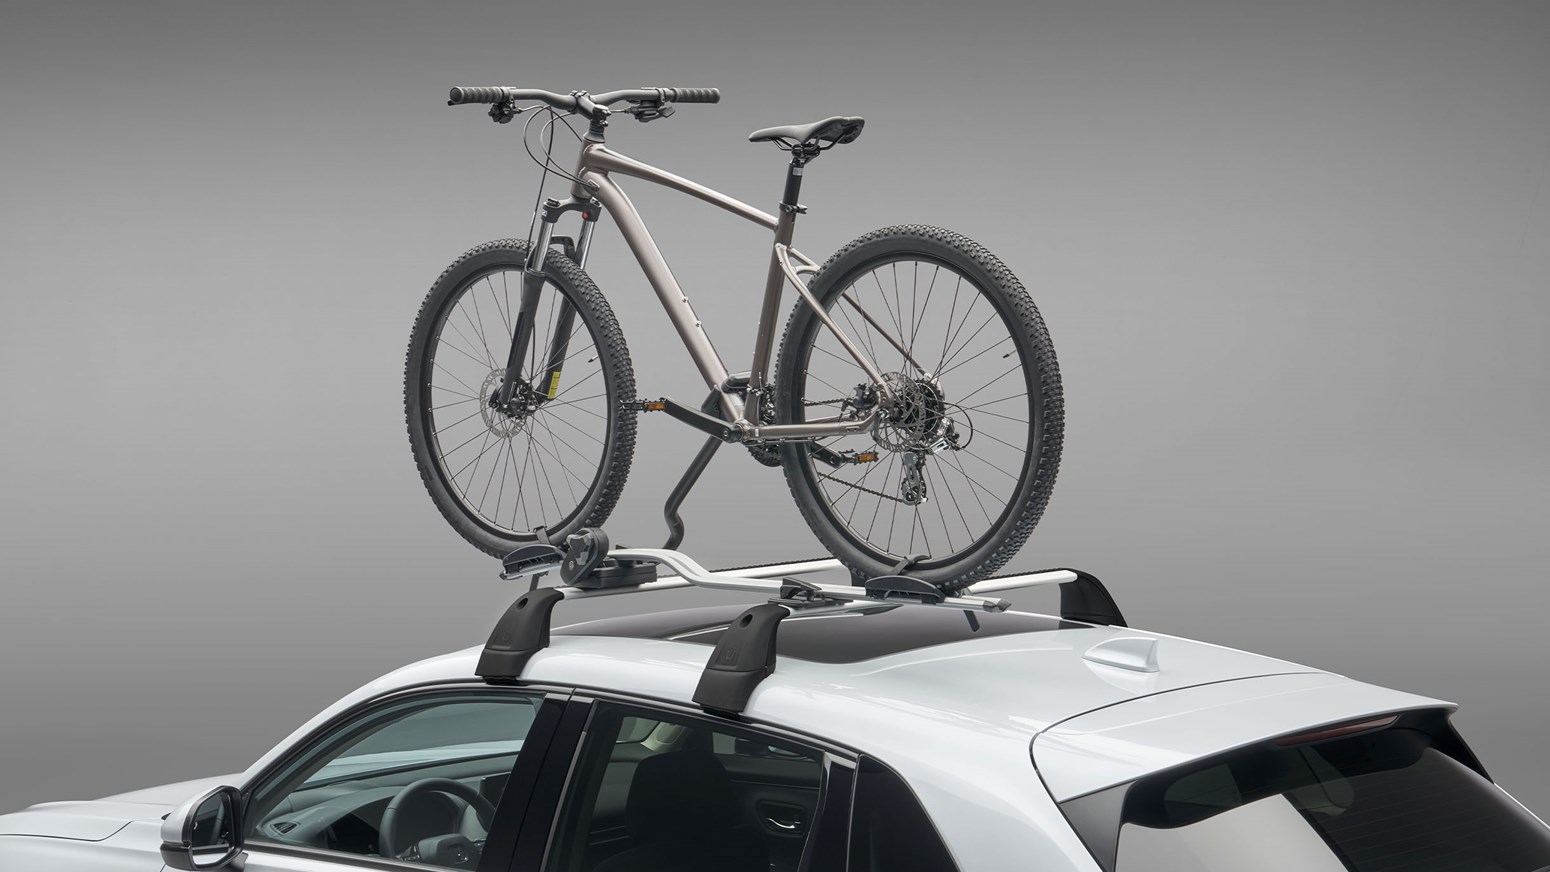 ZR V Thule Roof Bicycle Rack Expert Carousel